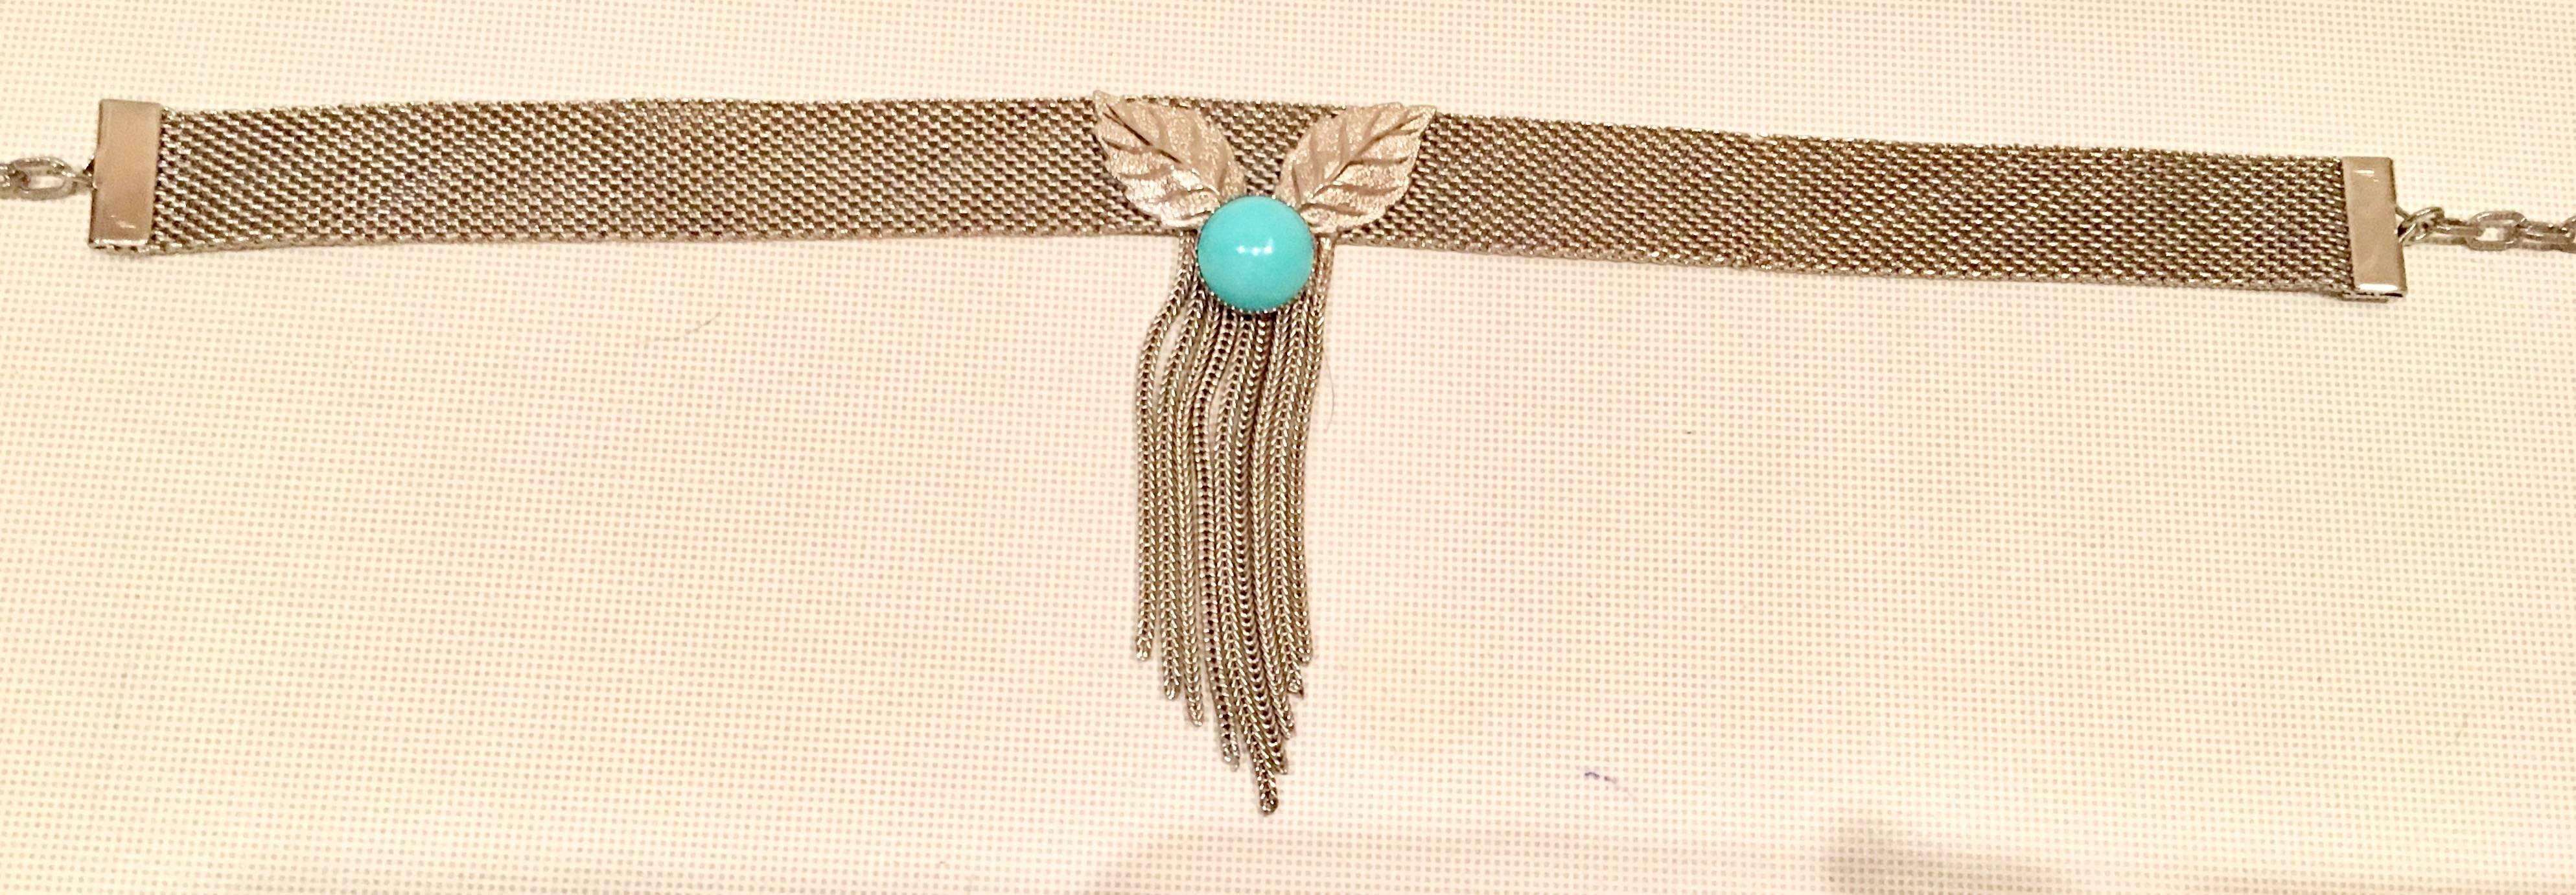 Rare silver mesh metal and faux turquoise center stone with raised and texture leaf detail choker necklace. Hook and chain closure, signed "Hobe" . Central ornament with fringe measures 3.5" inches in height. Necklace can be adjusted